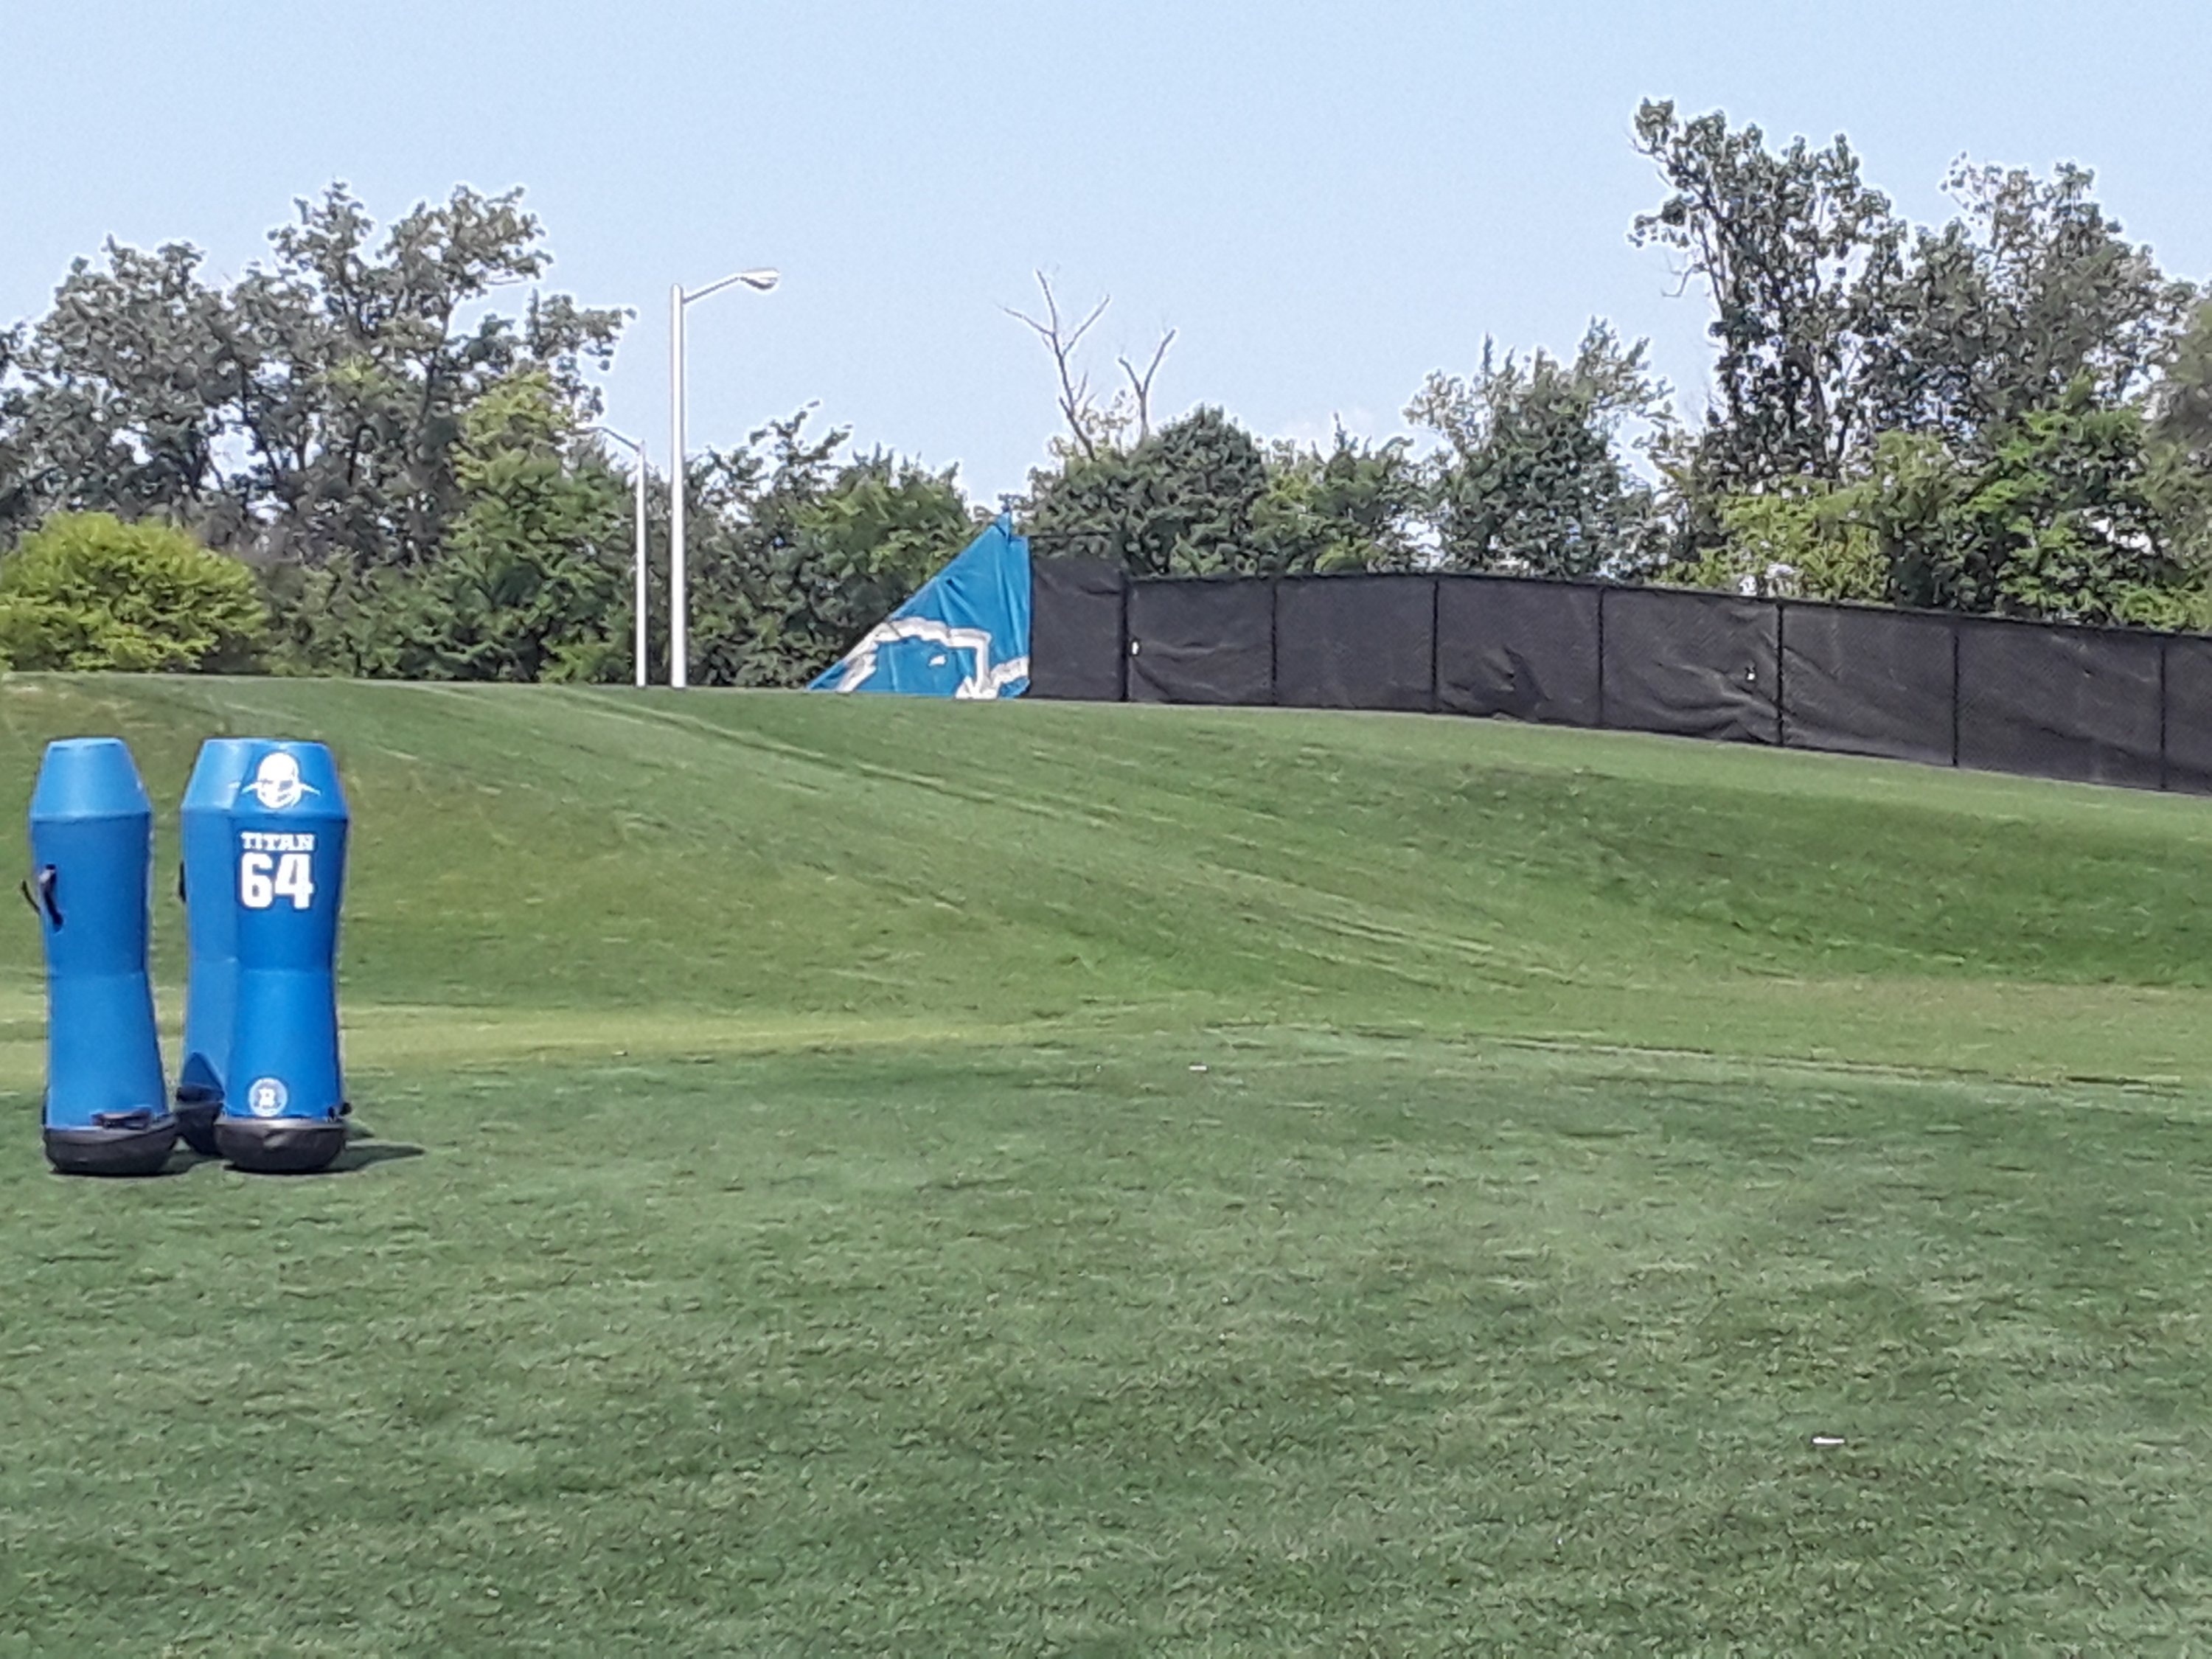 The Lions have added a hill at the training facility